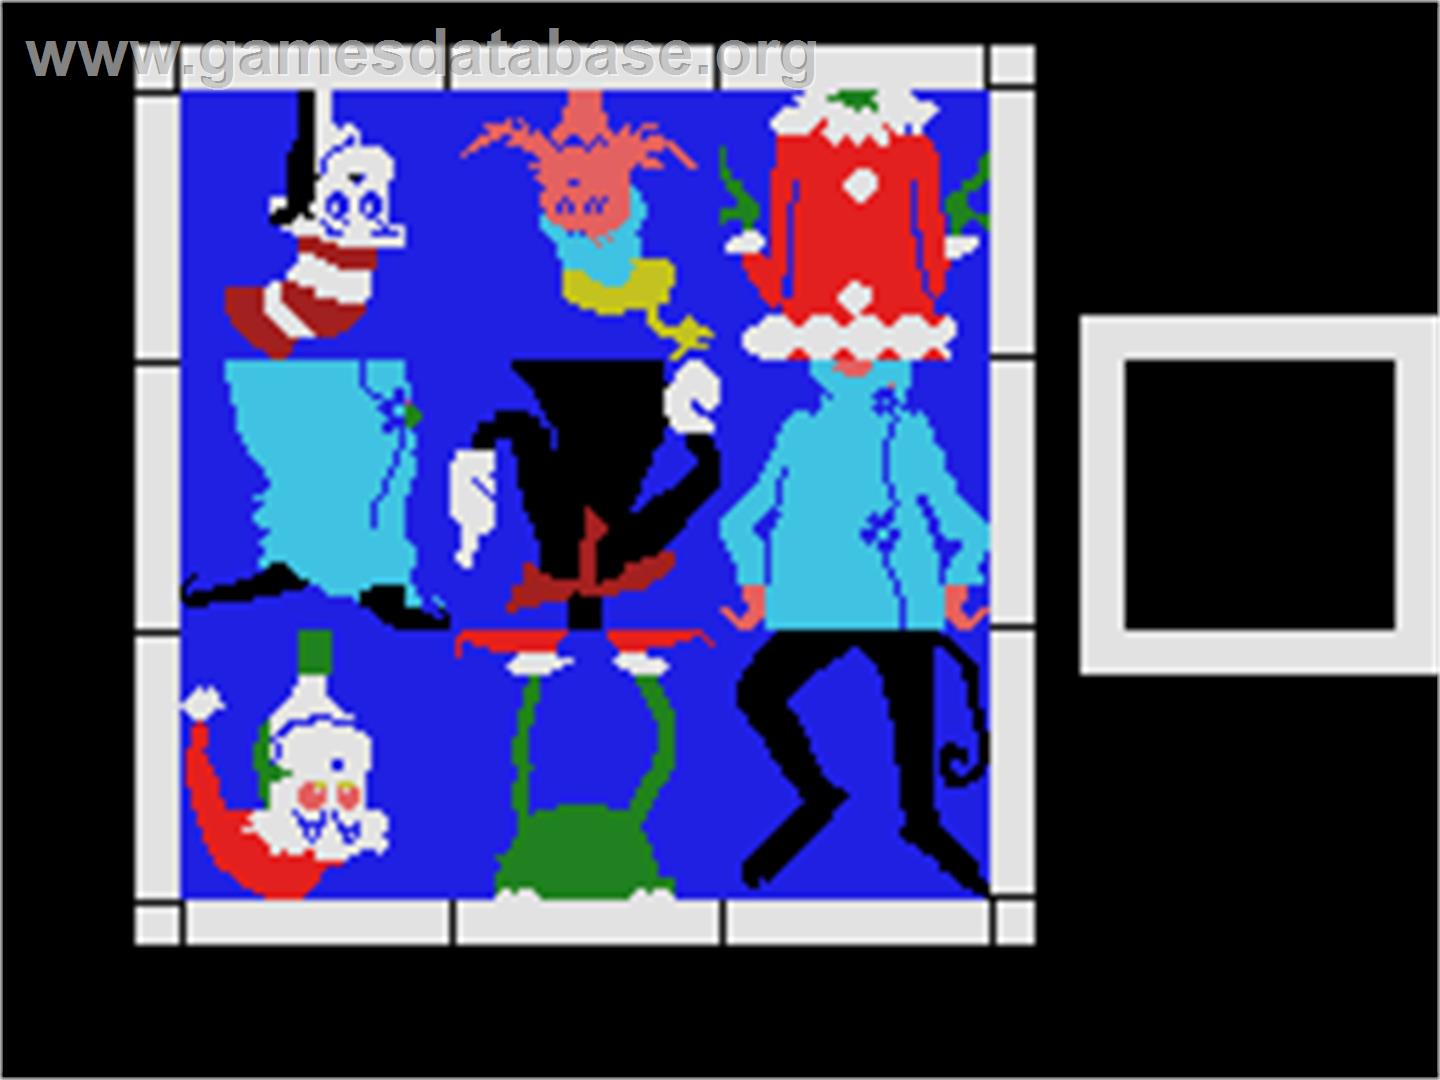 Dr. Seuss's Fix-Up the Mix-Up Puzzler - Coleco Vision - Artwork - In Game